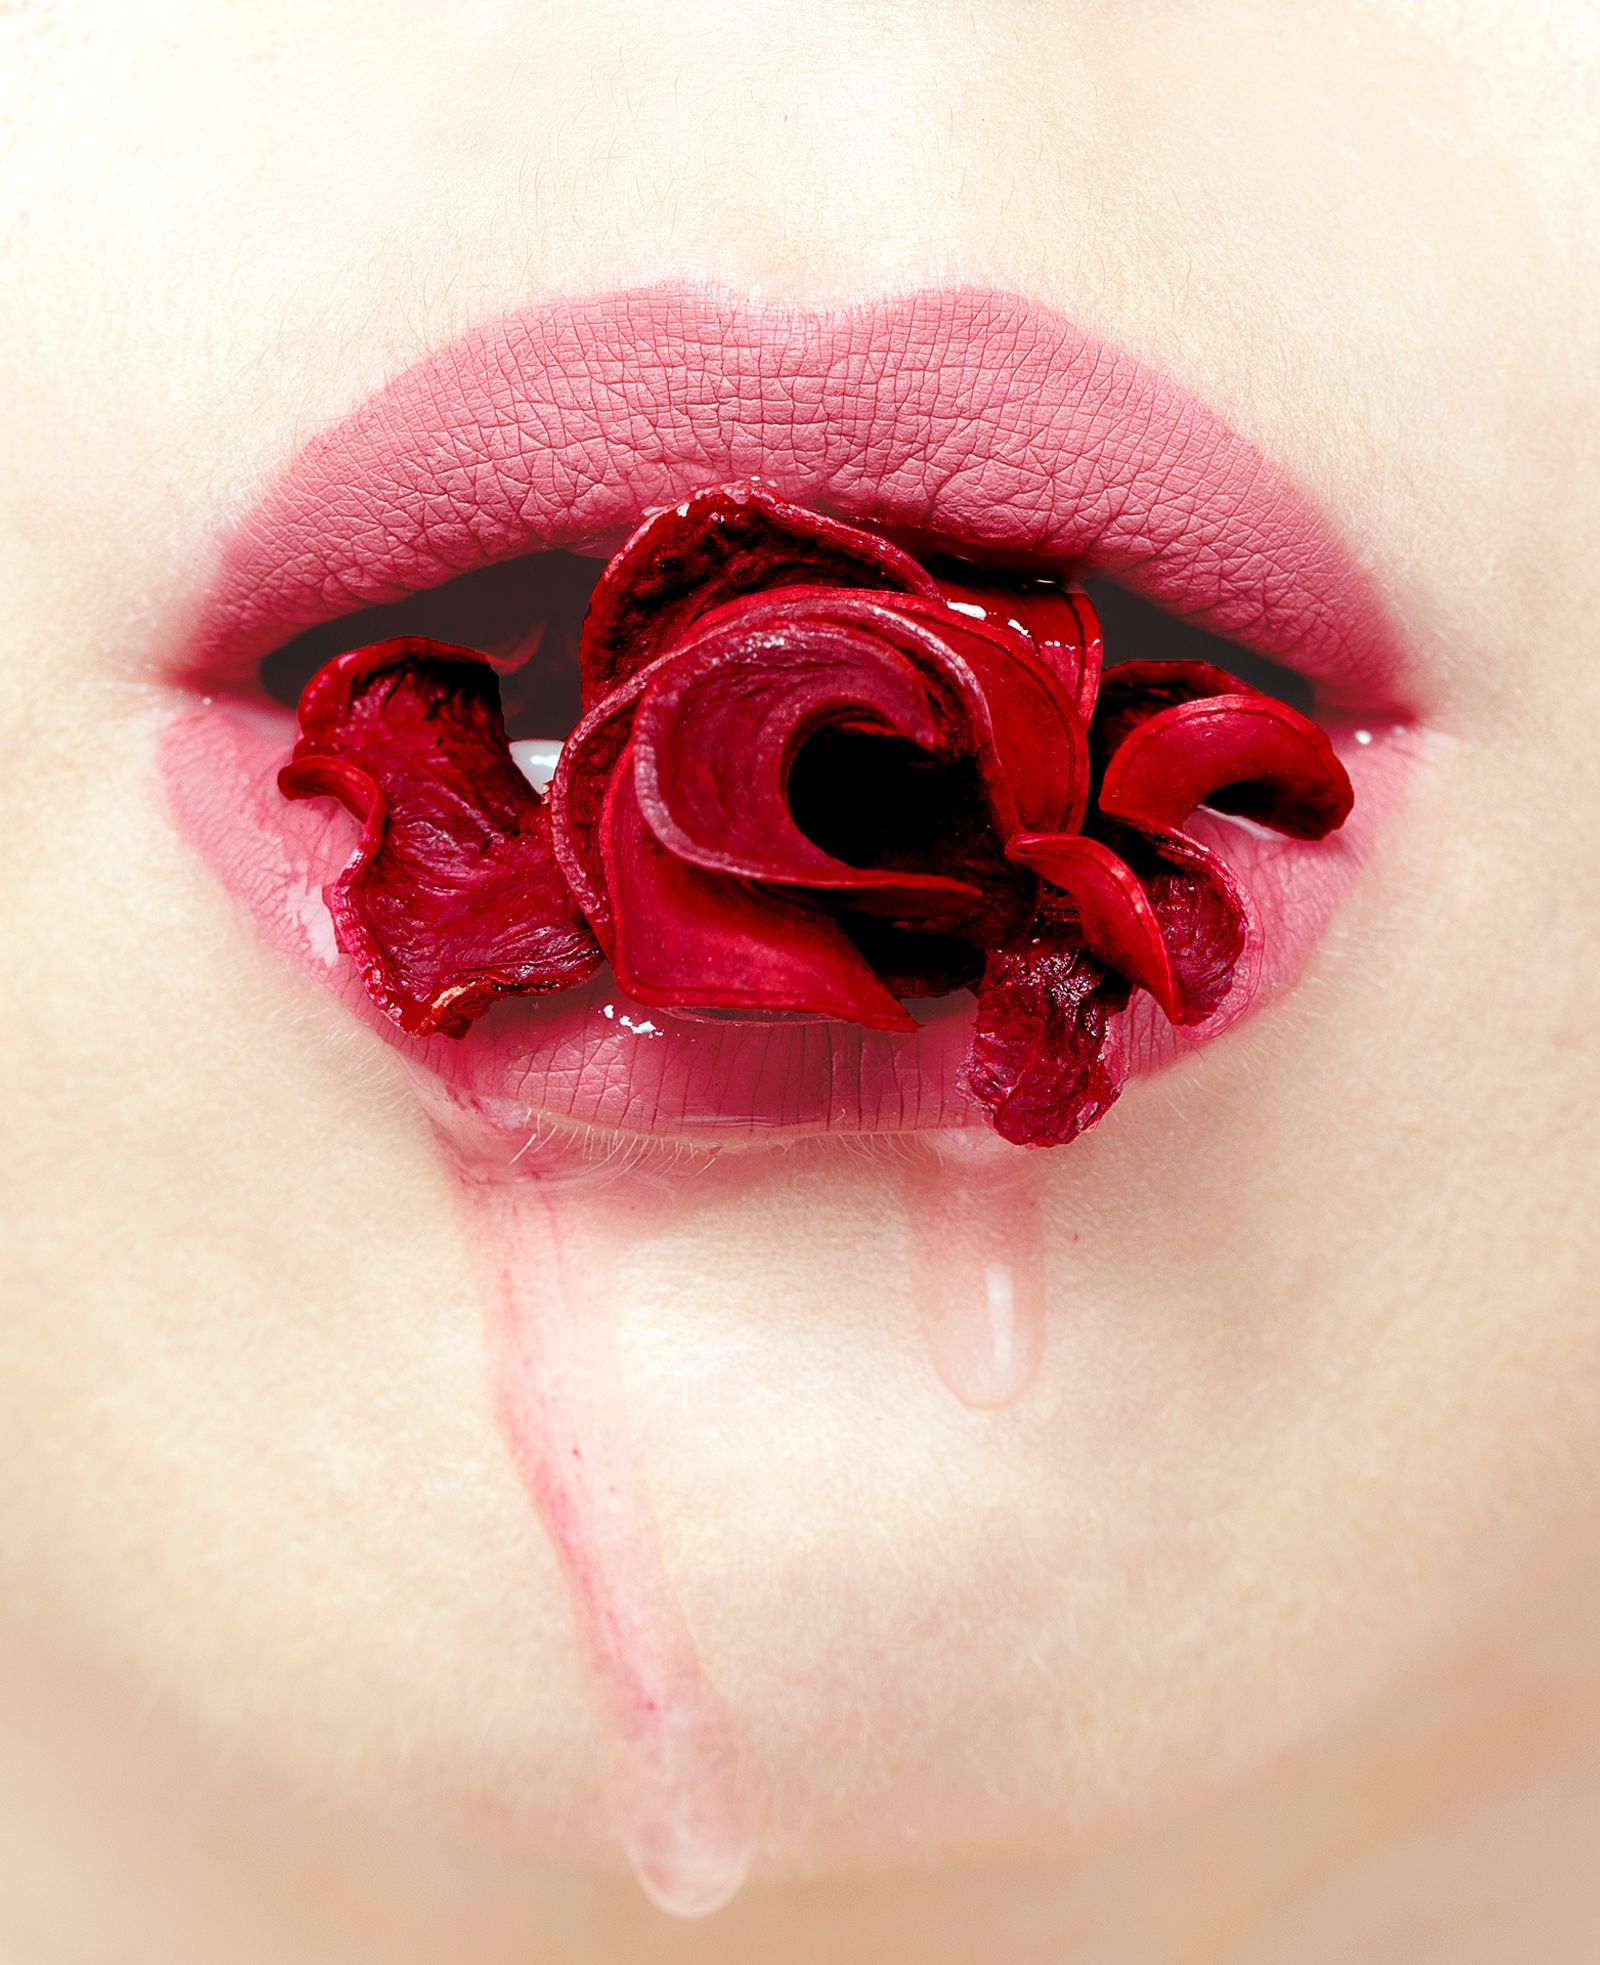 © Ana Espinal - Wild Lips, Archival inkjet print, 20 x 30 in. or smaller size.